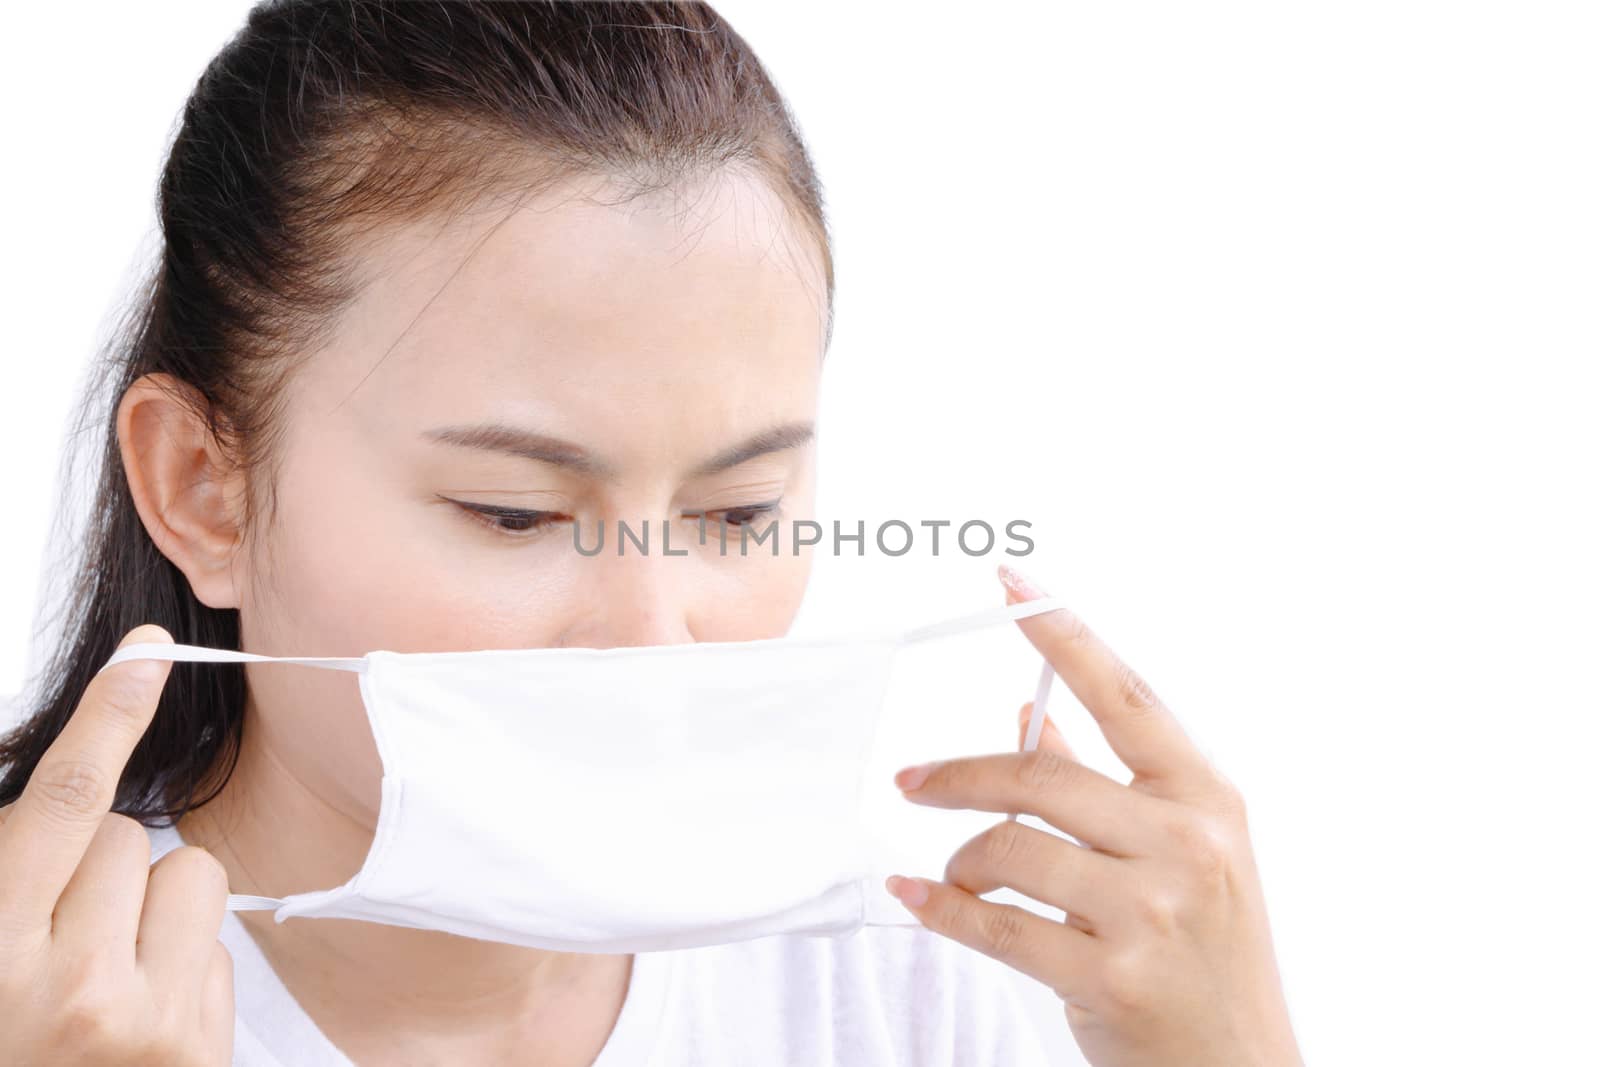 Closeup woman wearing face mask for protect air polution or virus covid 19 , health care and medical concept
